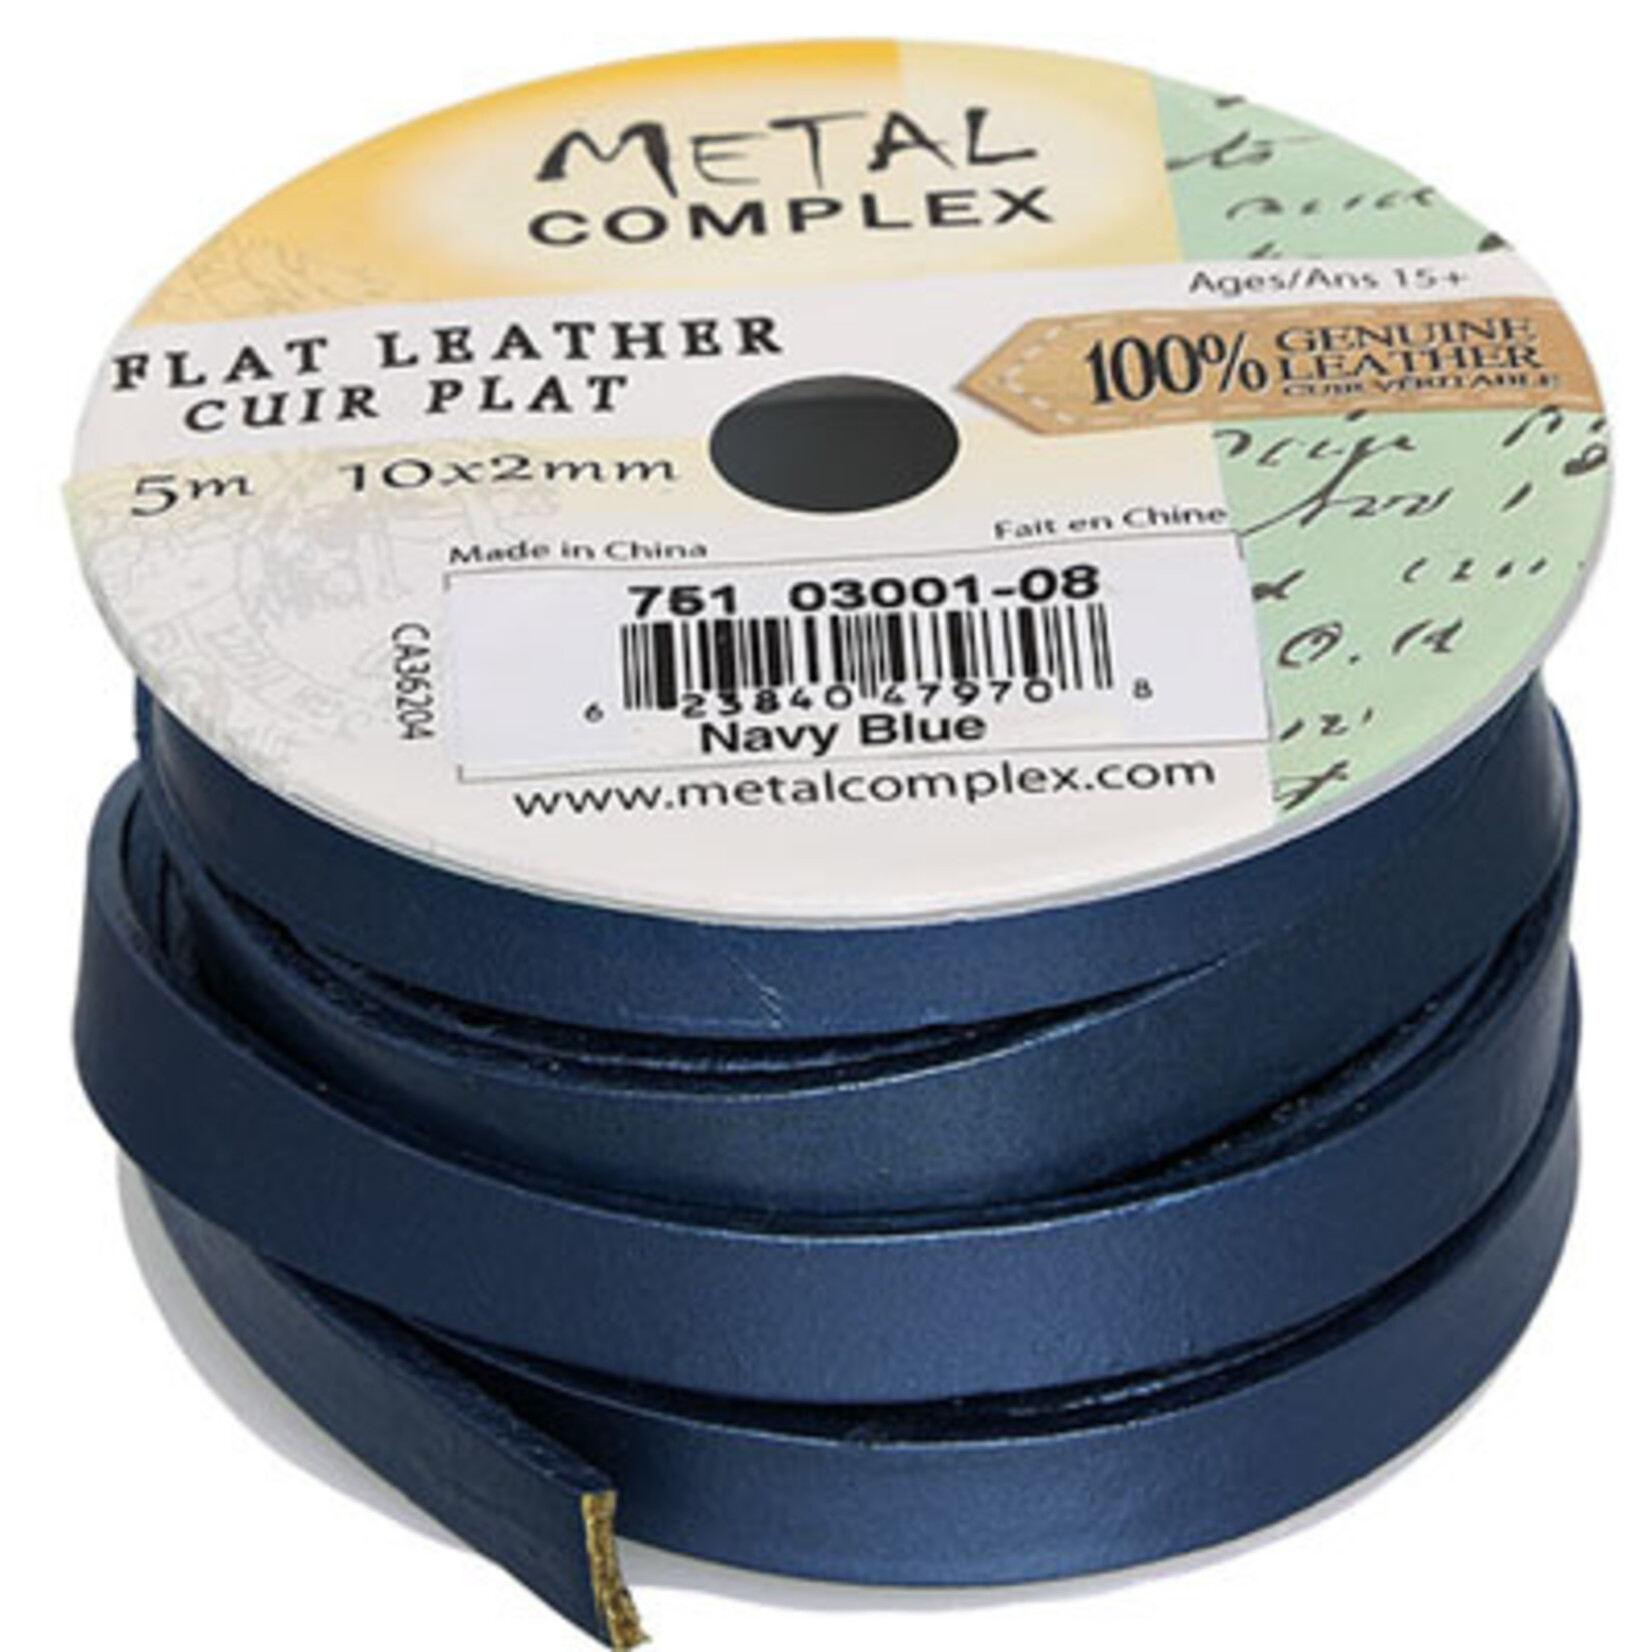 Flat Leather 10 x 2mm  (5 Meter Roll)